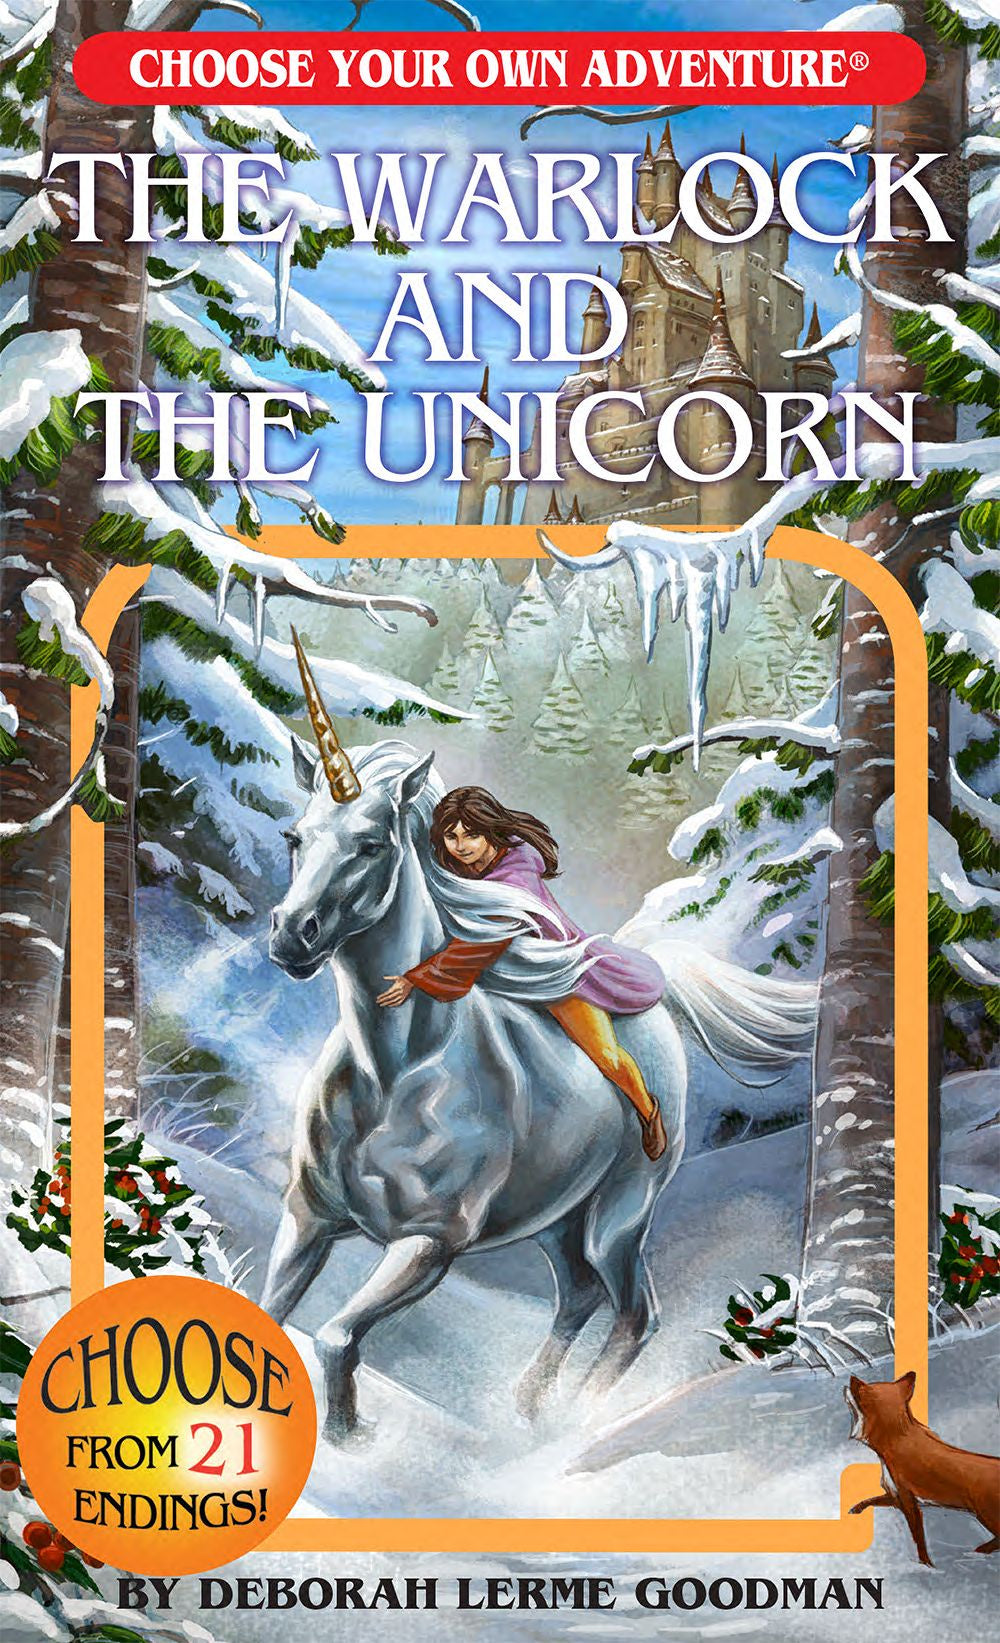 The Warlock and The Unicorn Choose Your Own Adventure Book